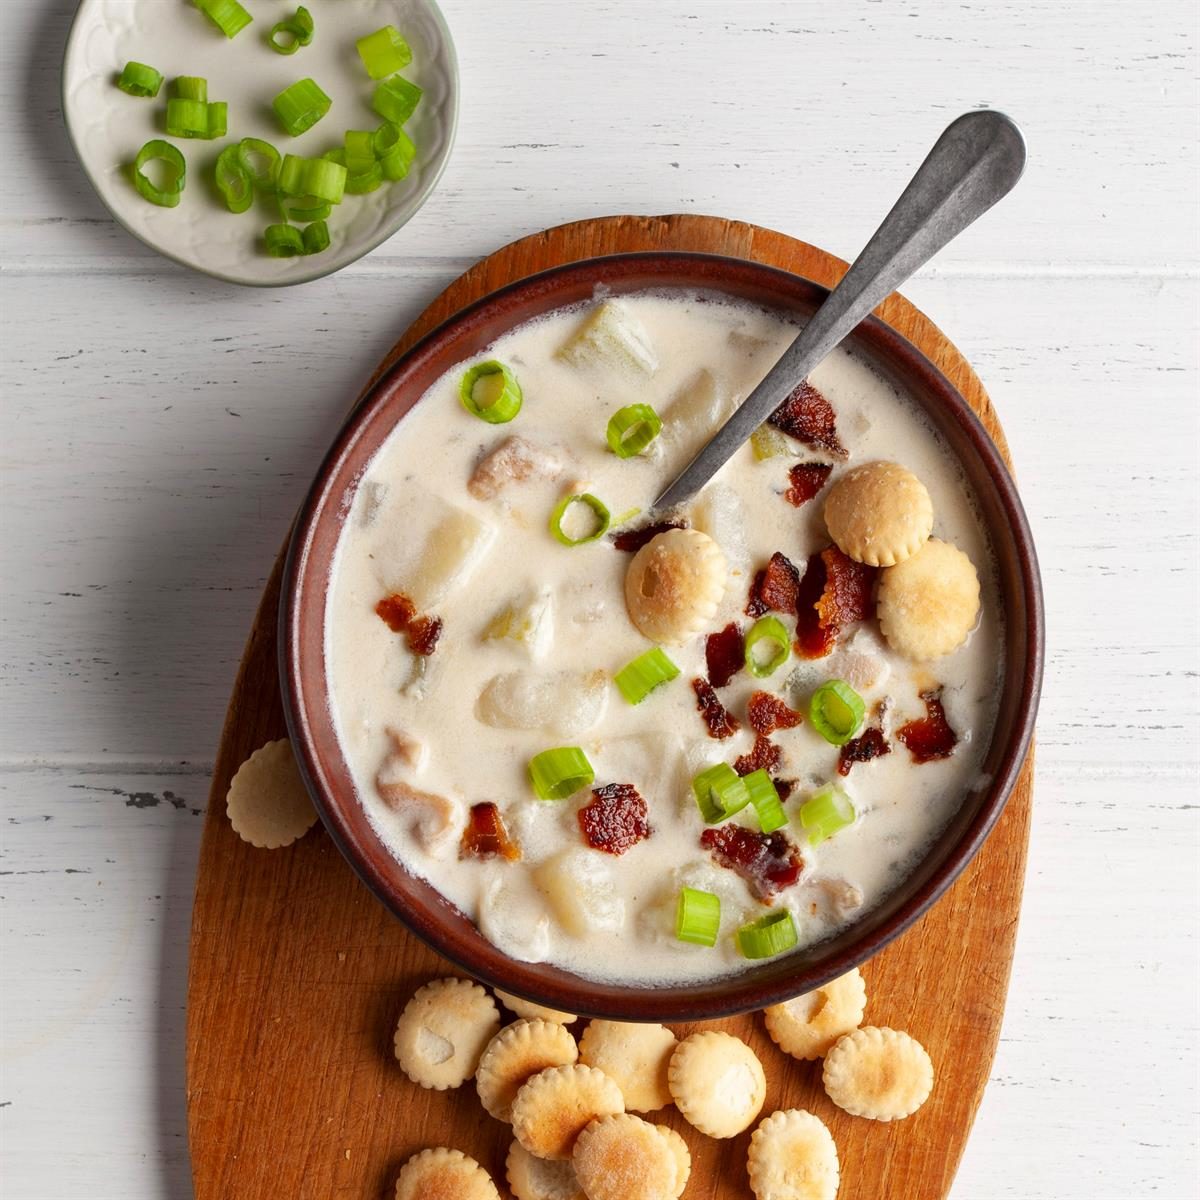 Inspired by: New England Clam Chowder